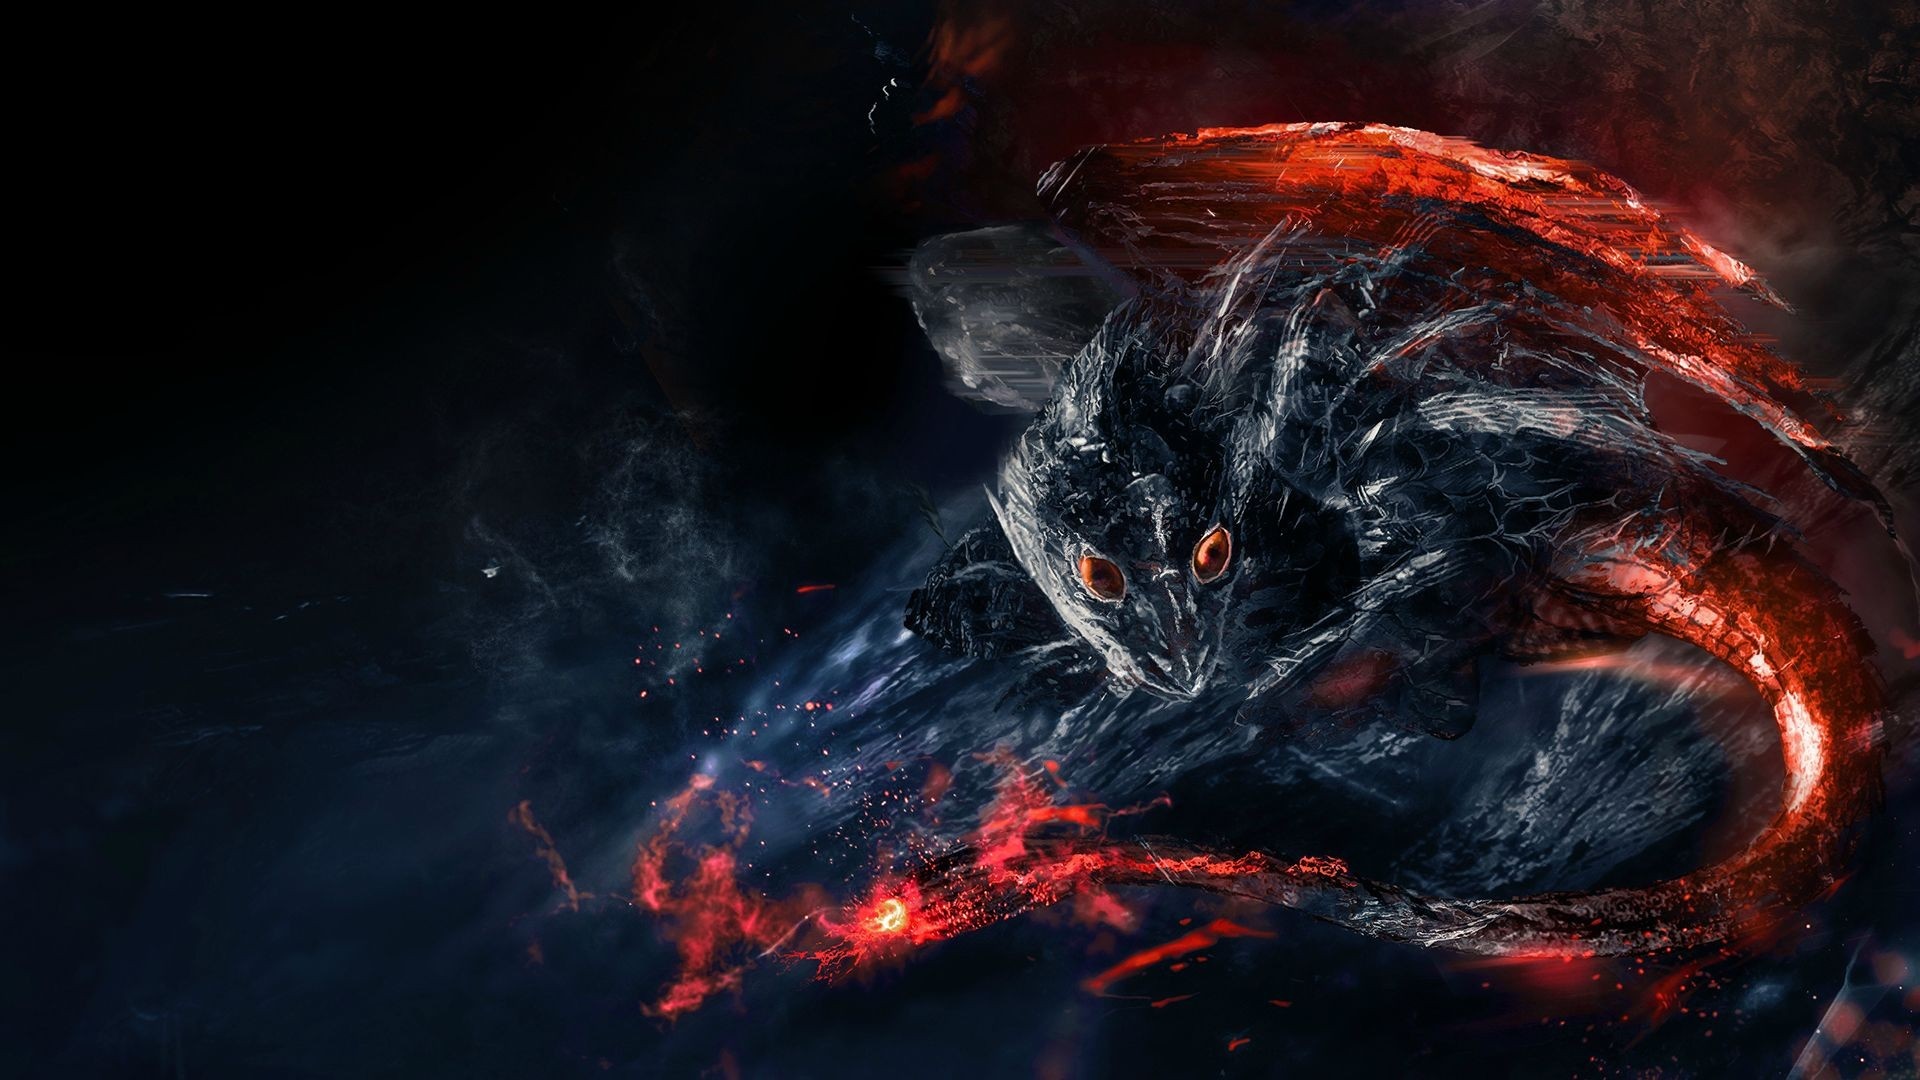 fantasy art, creature, lava, flame, darkness, screenshot, computer wallpaper, fictional character, special effects, outer space, geological phenomenon Gallery HD Wallpaper